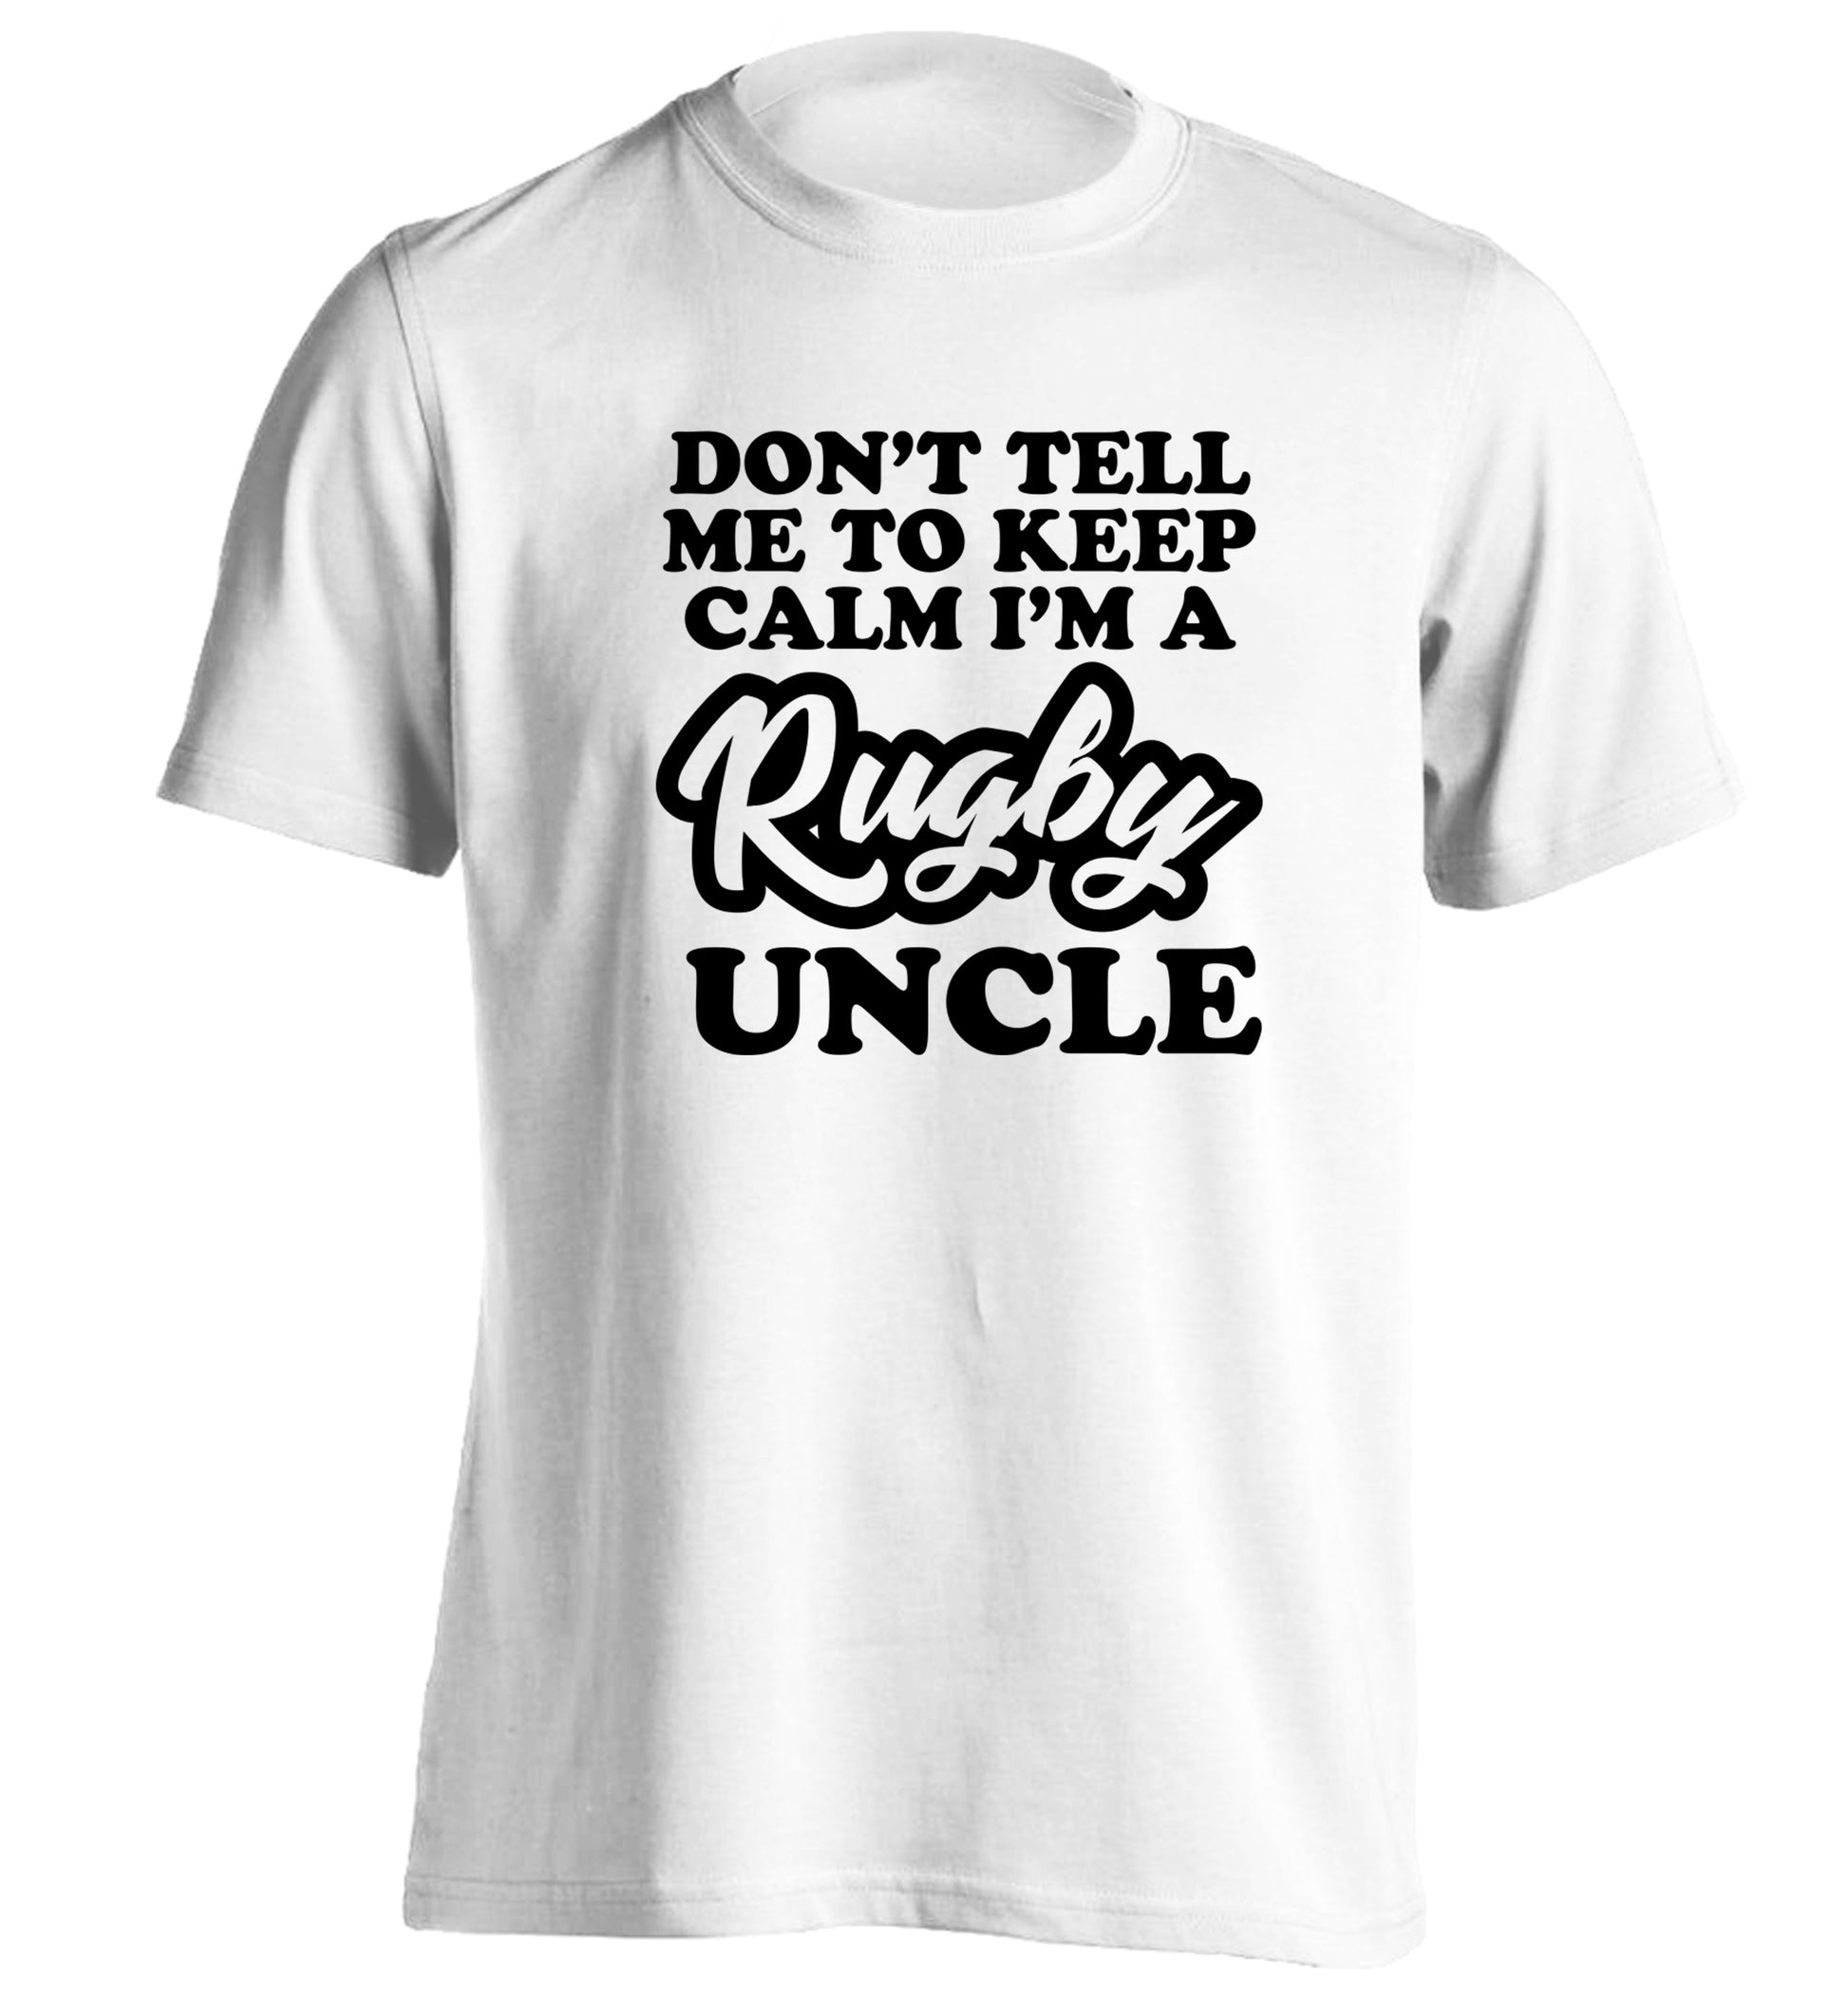 Don't tell me to keep calm I'm a rugby uncle adults unisex white Tshirt 2XL